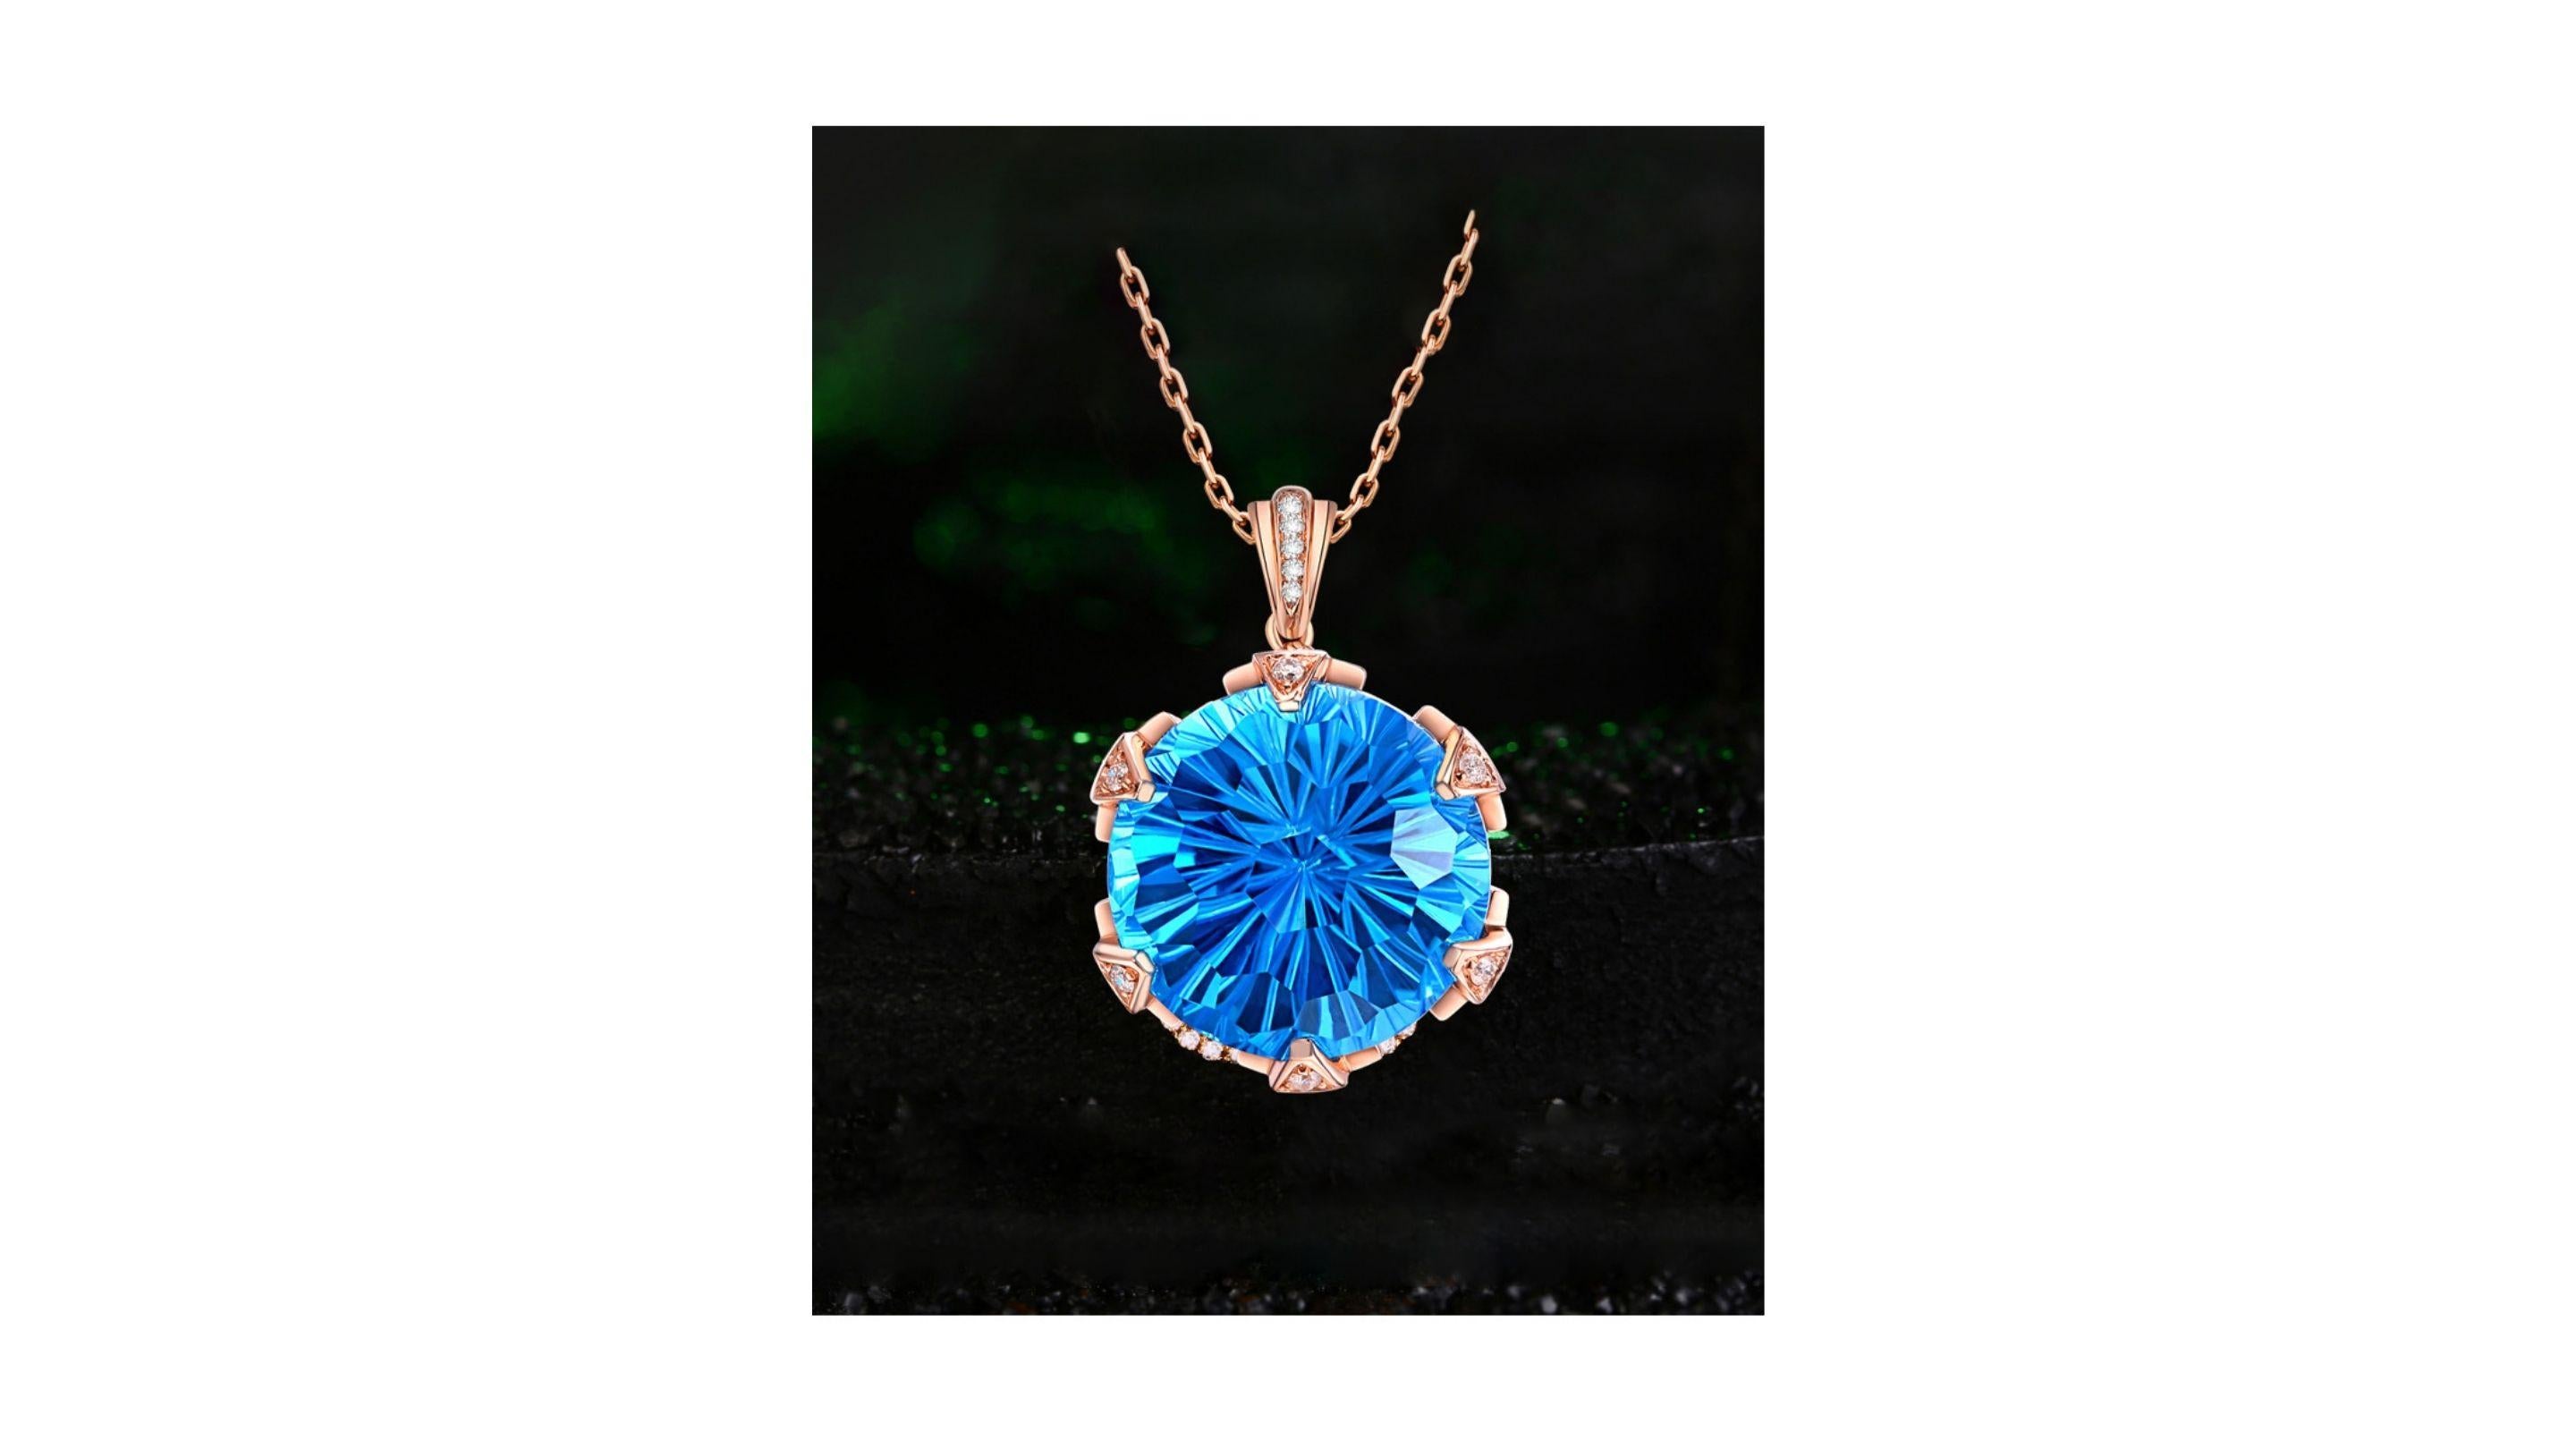 
Unique Blue Topaz Necklace at 1.608ct  set in 18k rose gold and really stands out with accent stones.   Very elegant and will make a ideal gift  